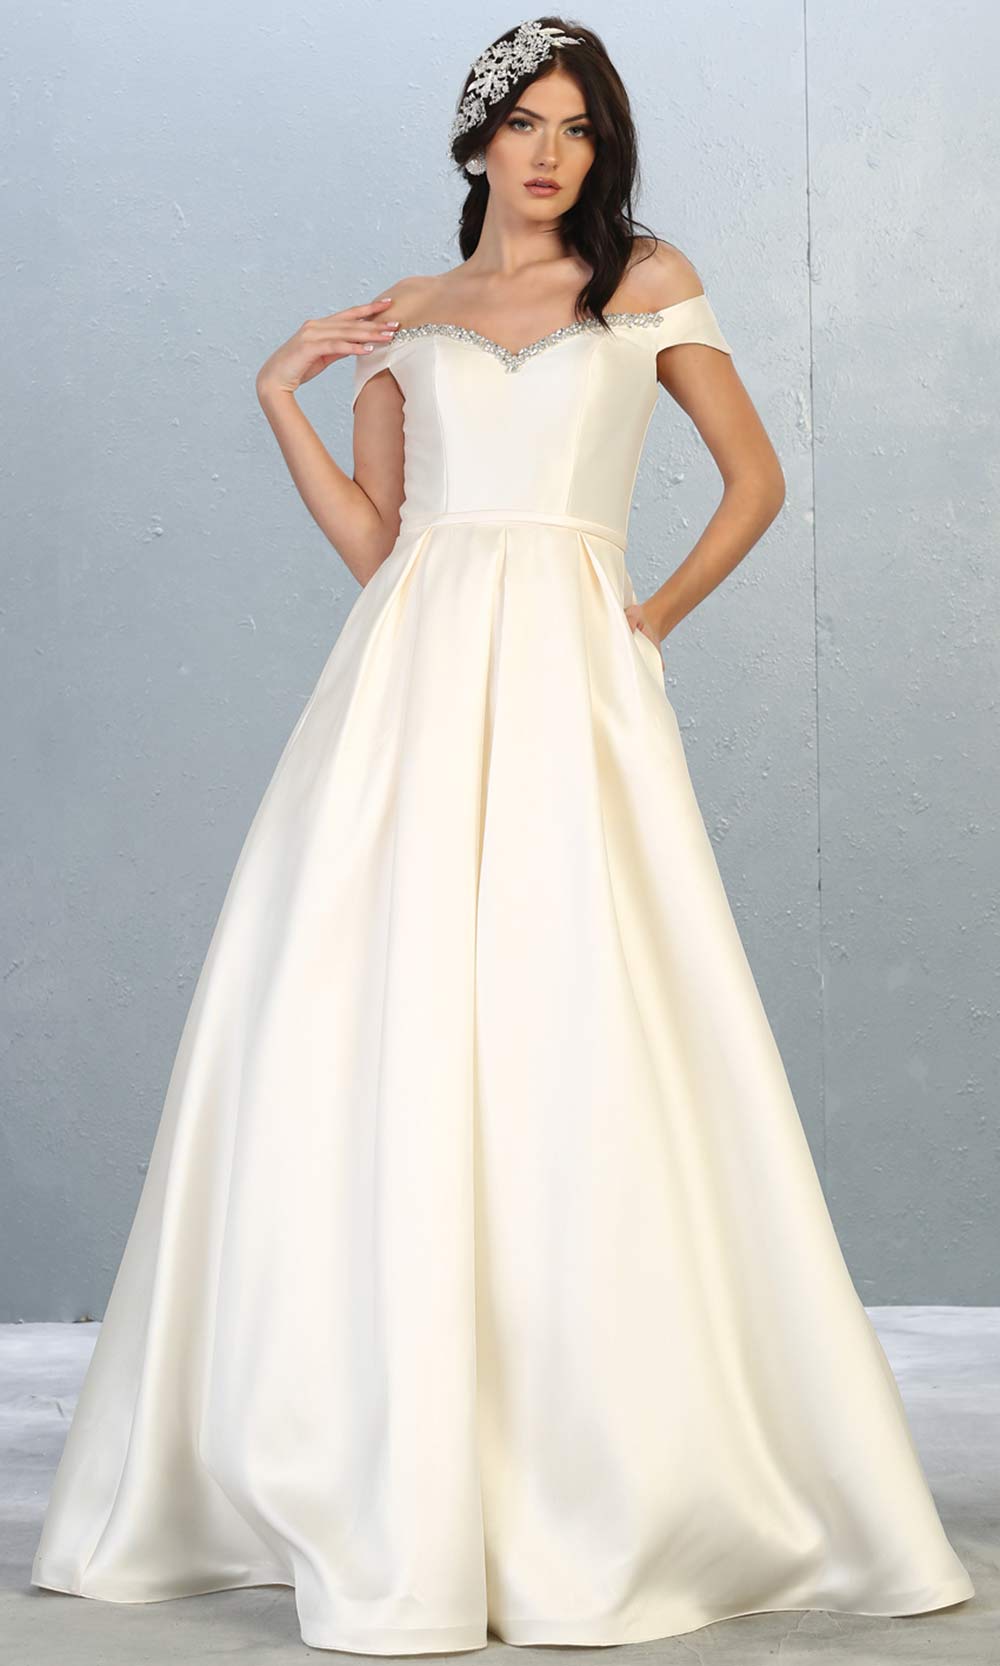 Mayqueen MQ1784-long ivory satin simple flowy bridal off shoulder dress. White formal dress is perfect for wedding bridal dress, white prom dress, simple wedding,second wedding, destination wedding dress, second wedding dress.Plus sizes avail.jpg